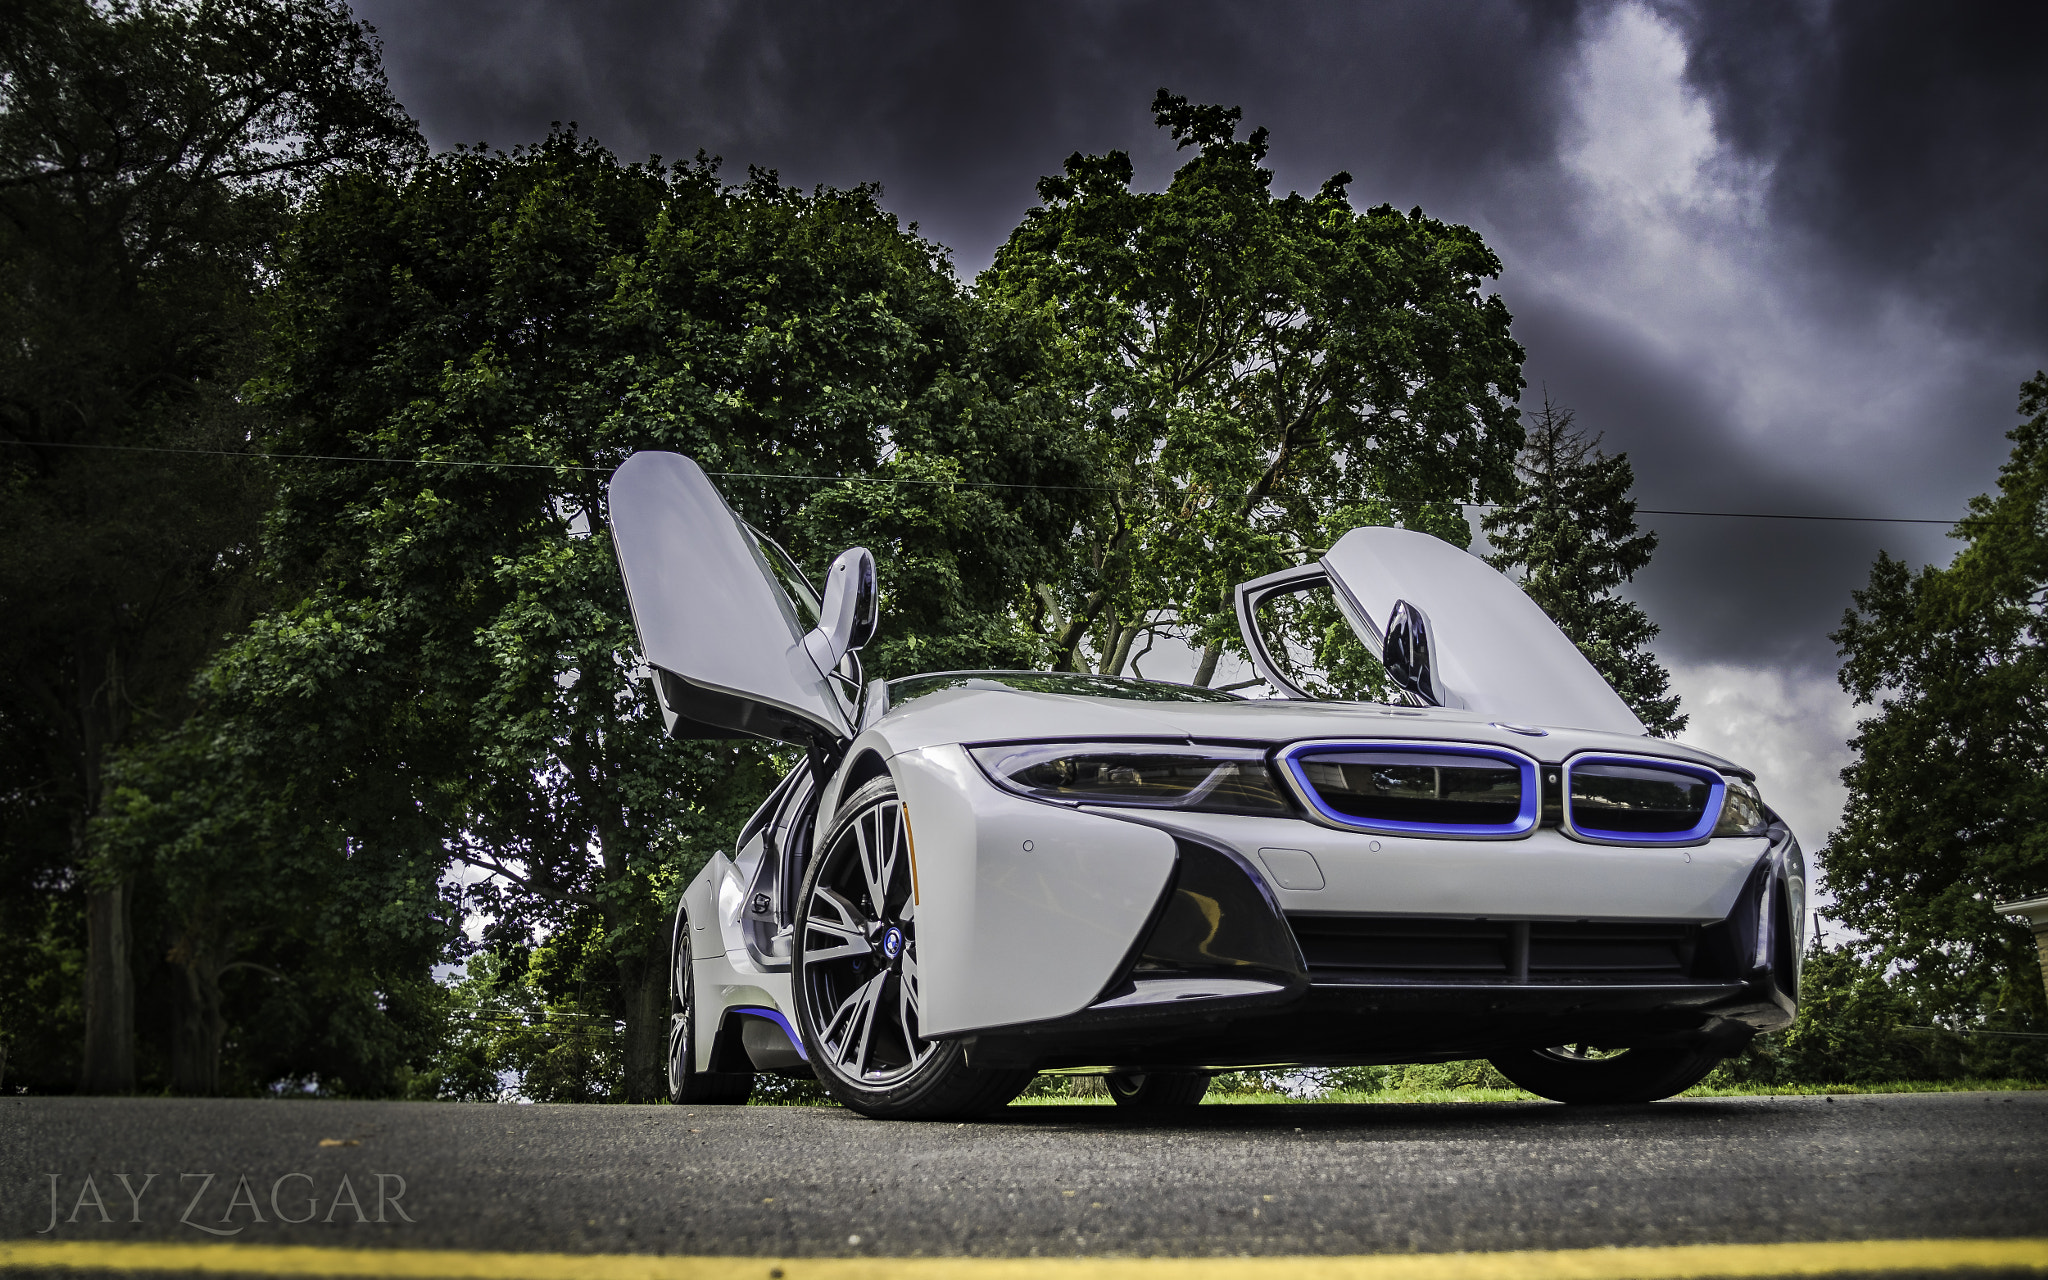 Sony ILCA-77M2 + Tamron 18-270mm F3.5-6.3 Di II PZD sample photo. Bmw i8 front photography